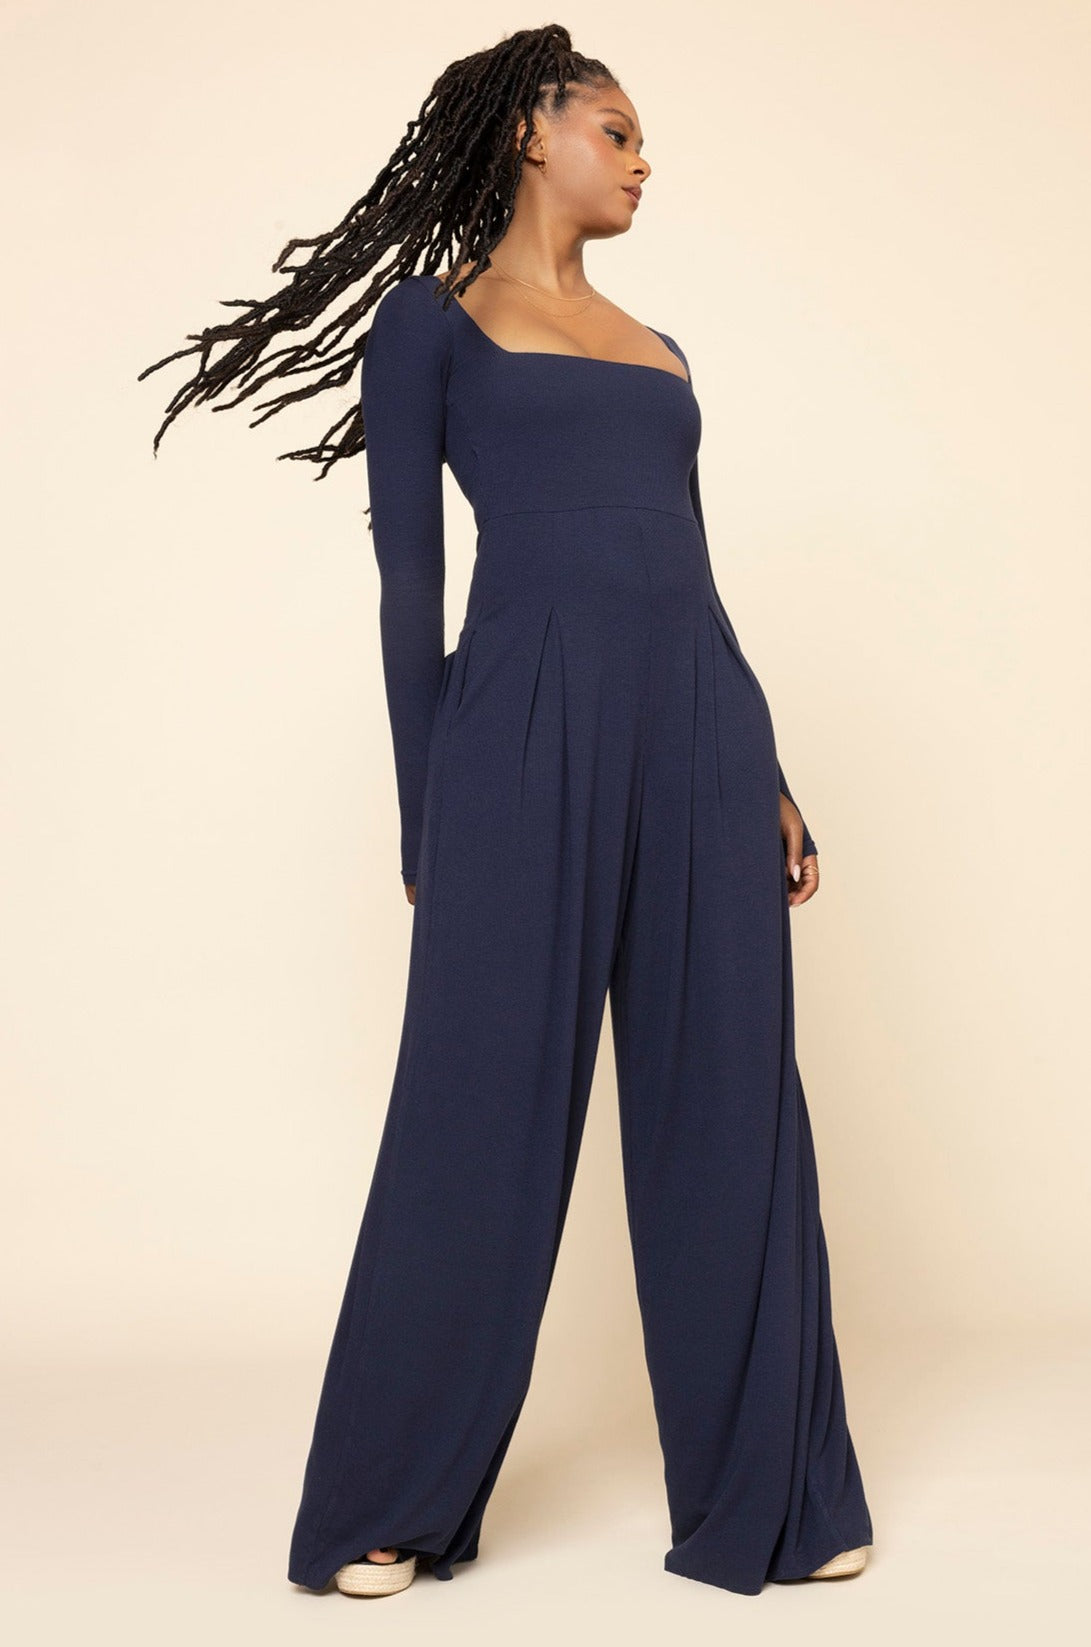 Go With The Flow Long Sleeve Jumpsuit - Cosmic Navy